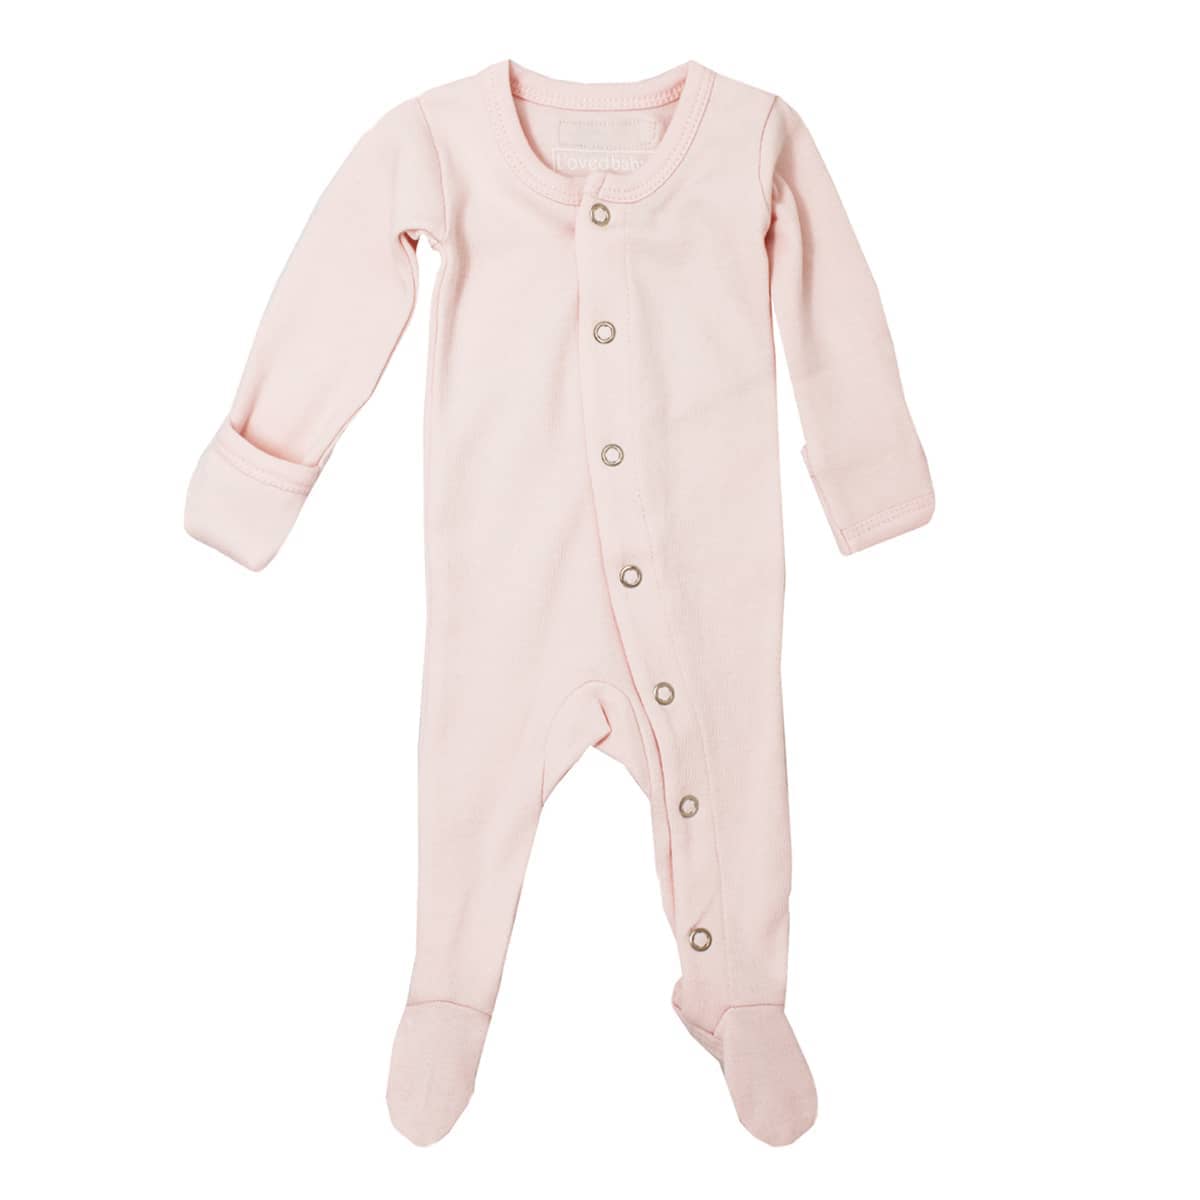 L'ovedbaby Organic Gl'oved Footed Overall - Blush